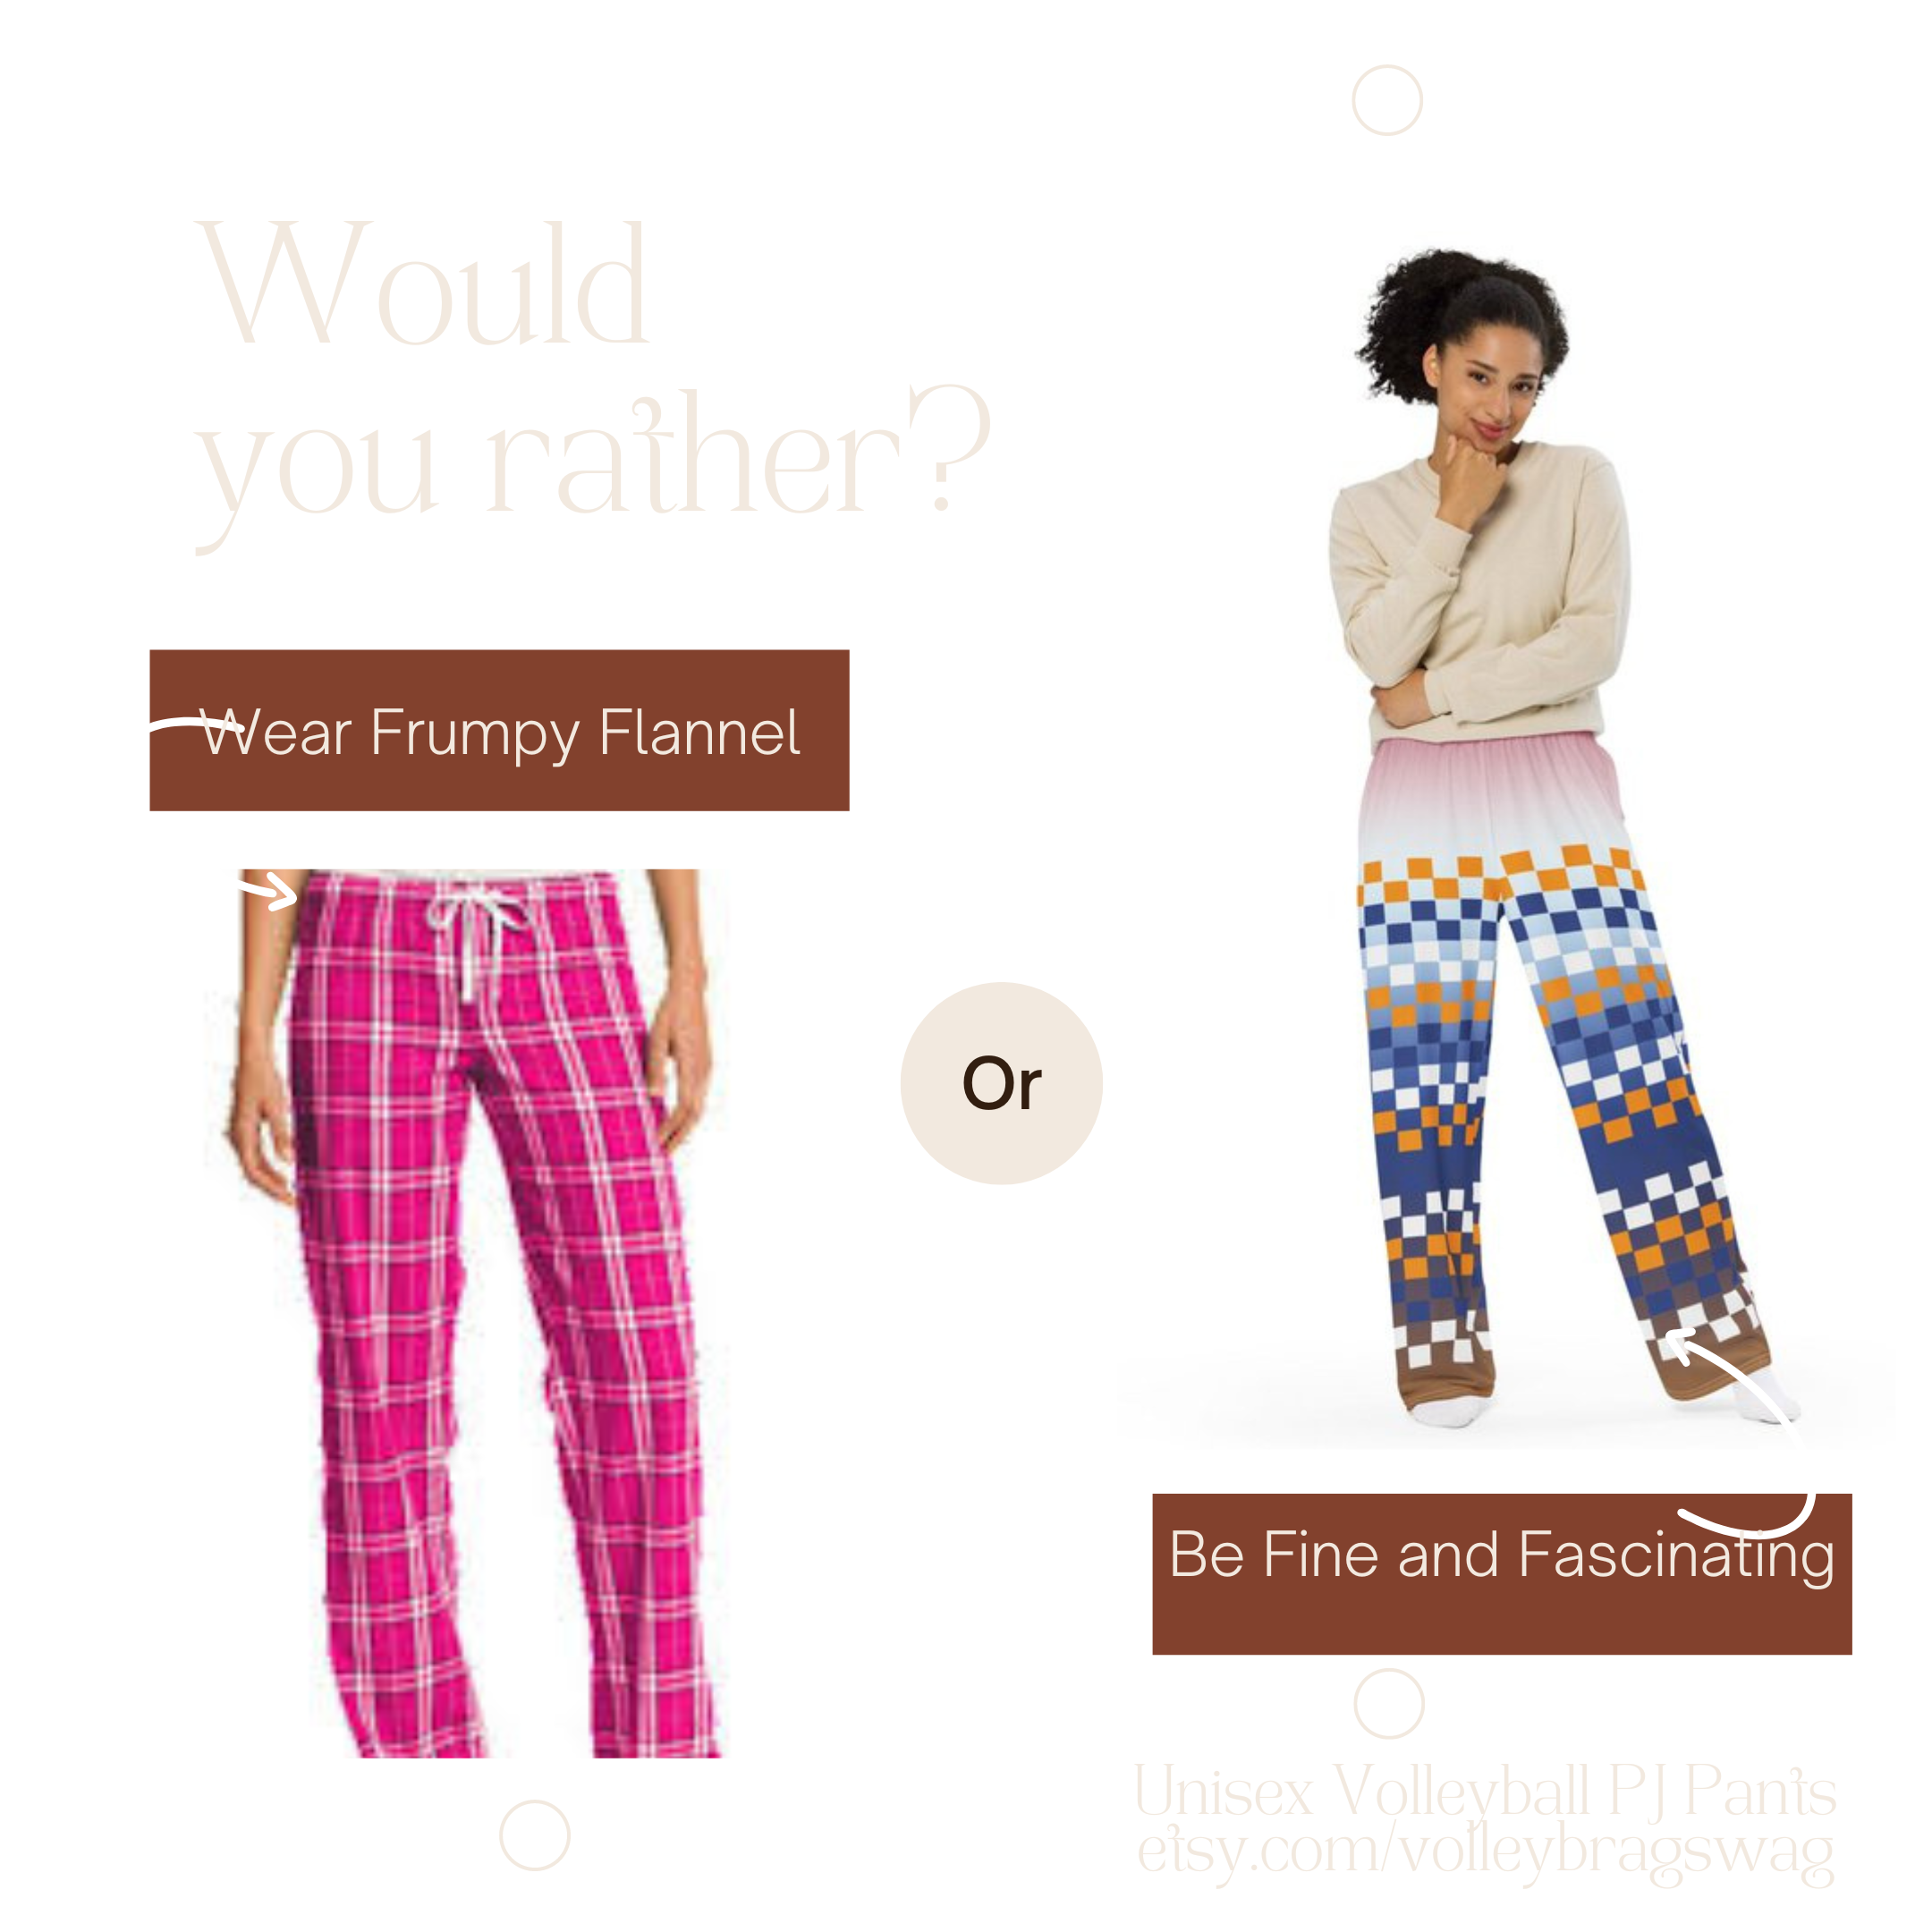 Say Good Bye To Frumpy Flannel Volleyball Pants And Say Hello To Fascinatingly Feisty Volleyball PJ Pants: These Dutch flag inspired wide leg lounge pants are available now on Etsy.